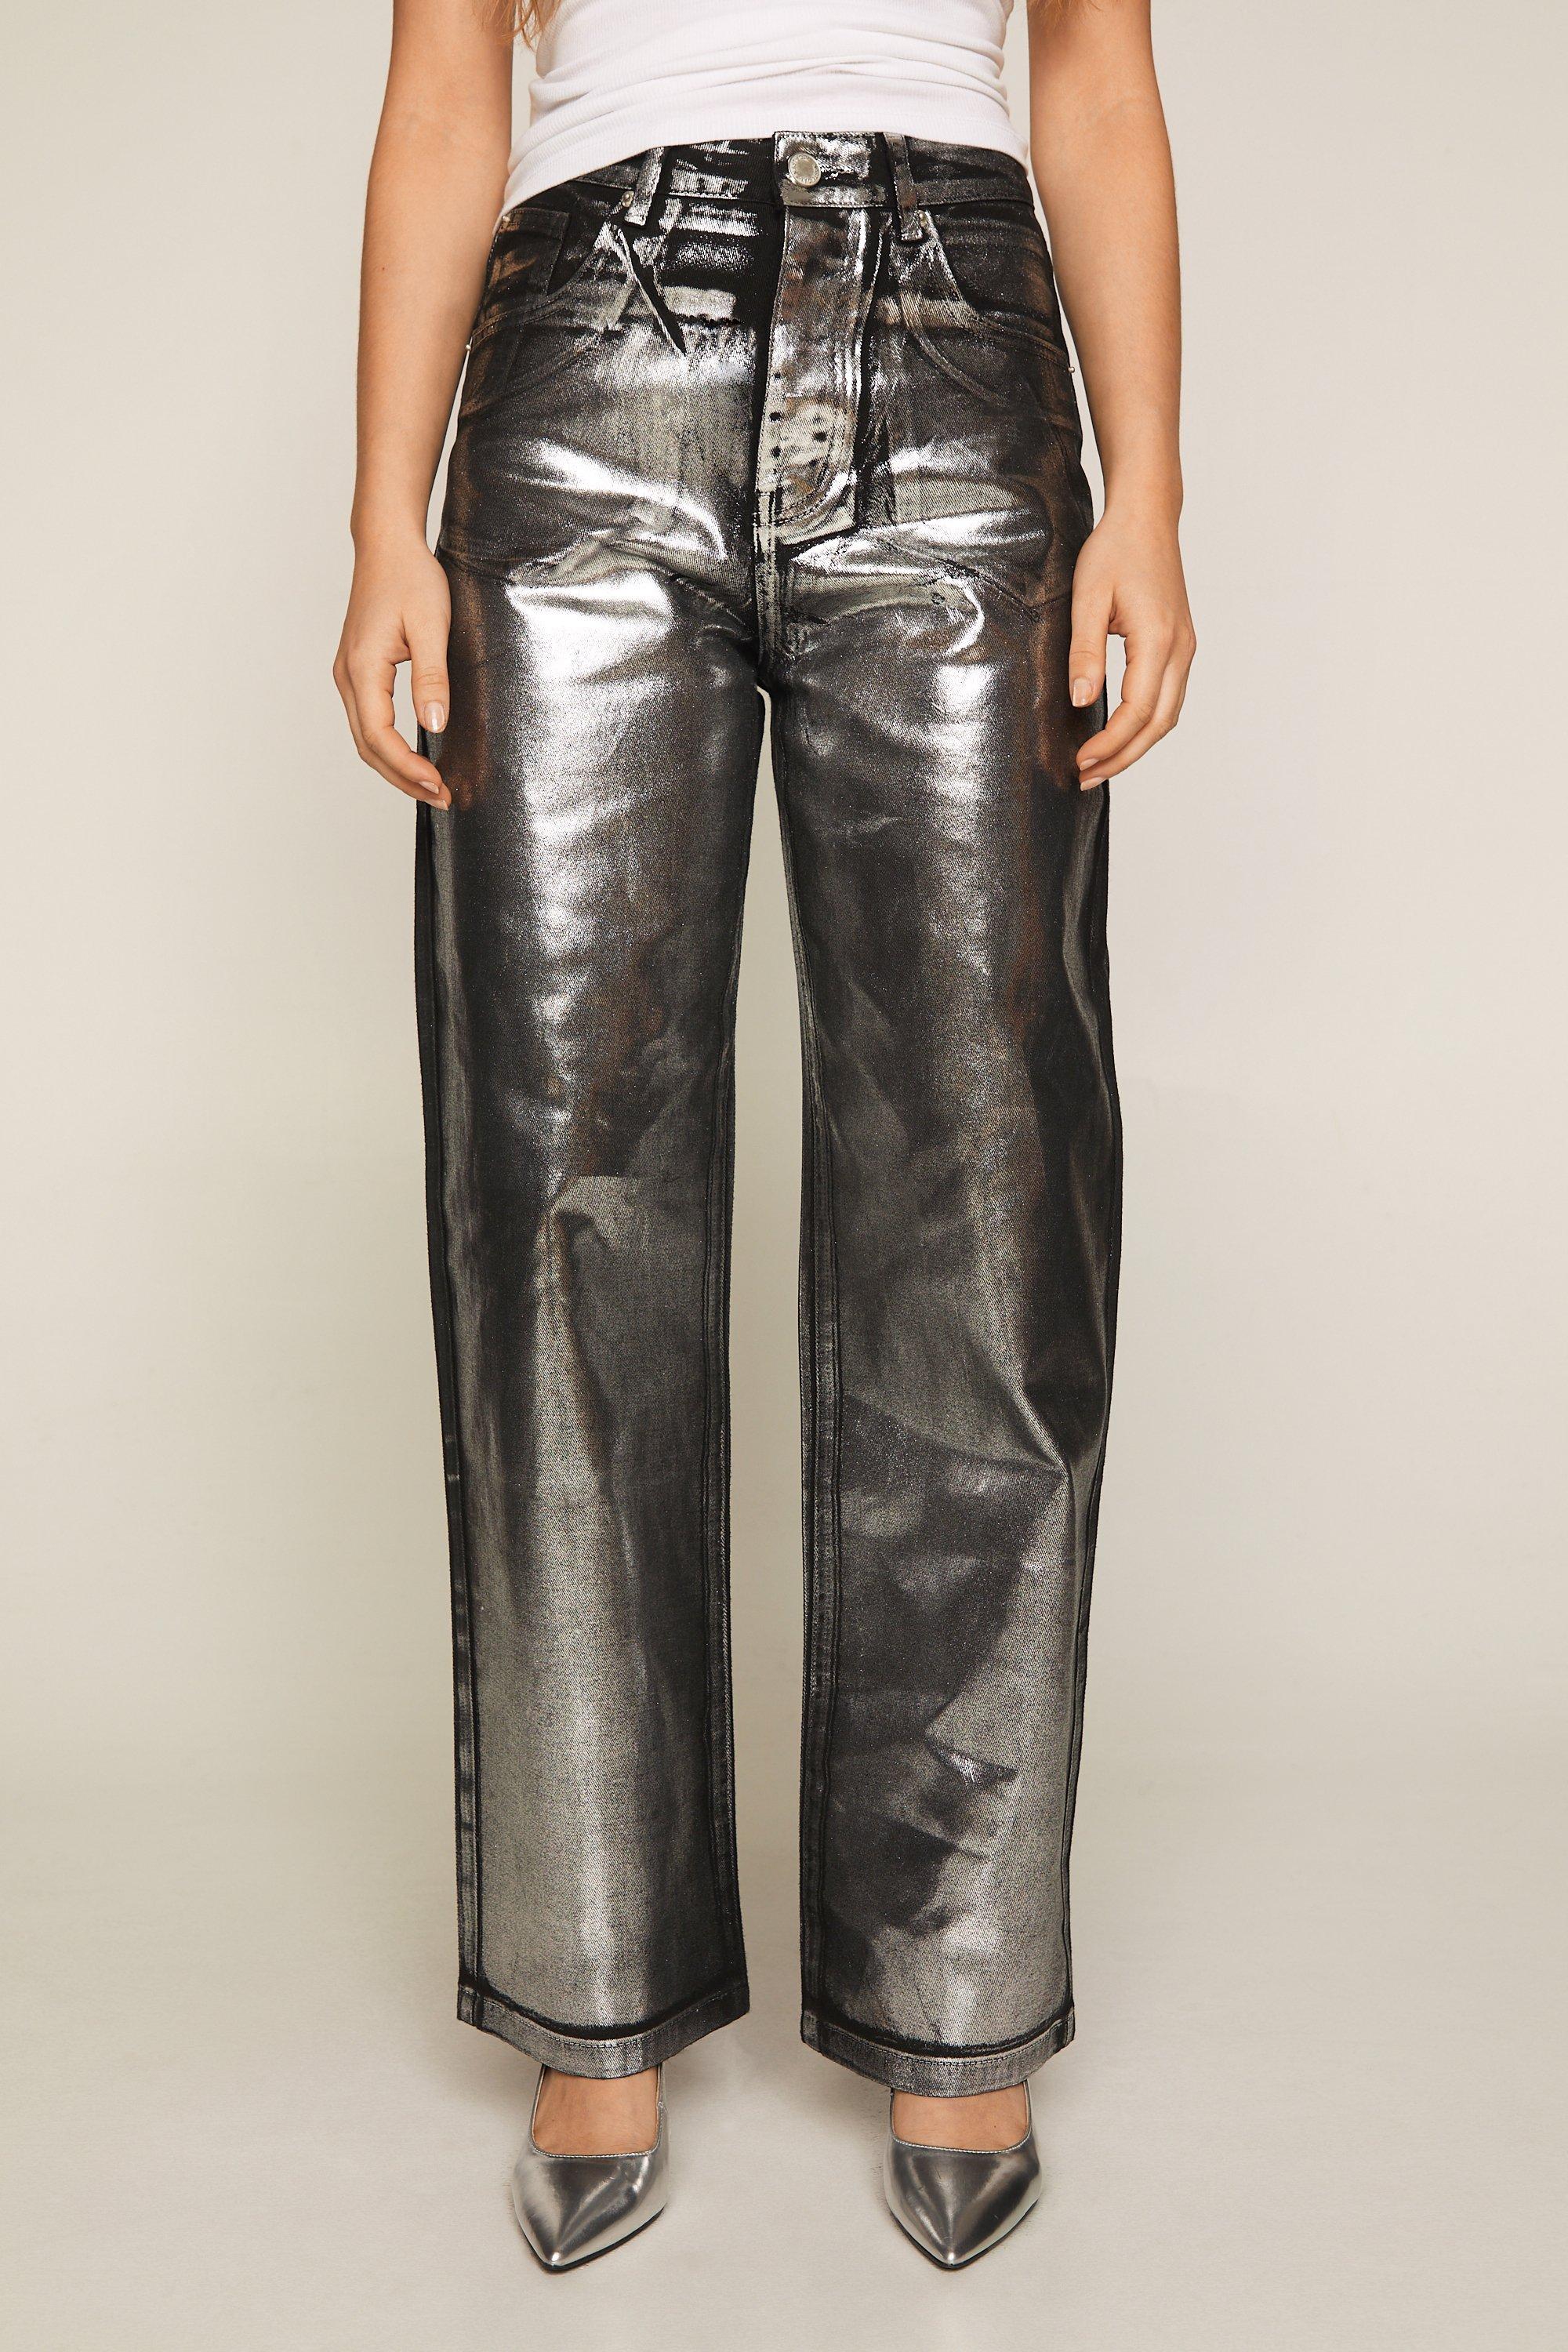 Silver Coated Metallic Jeans